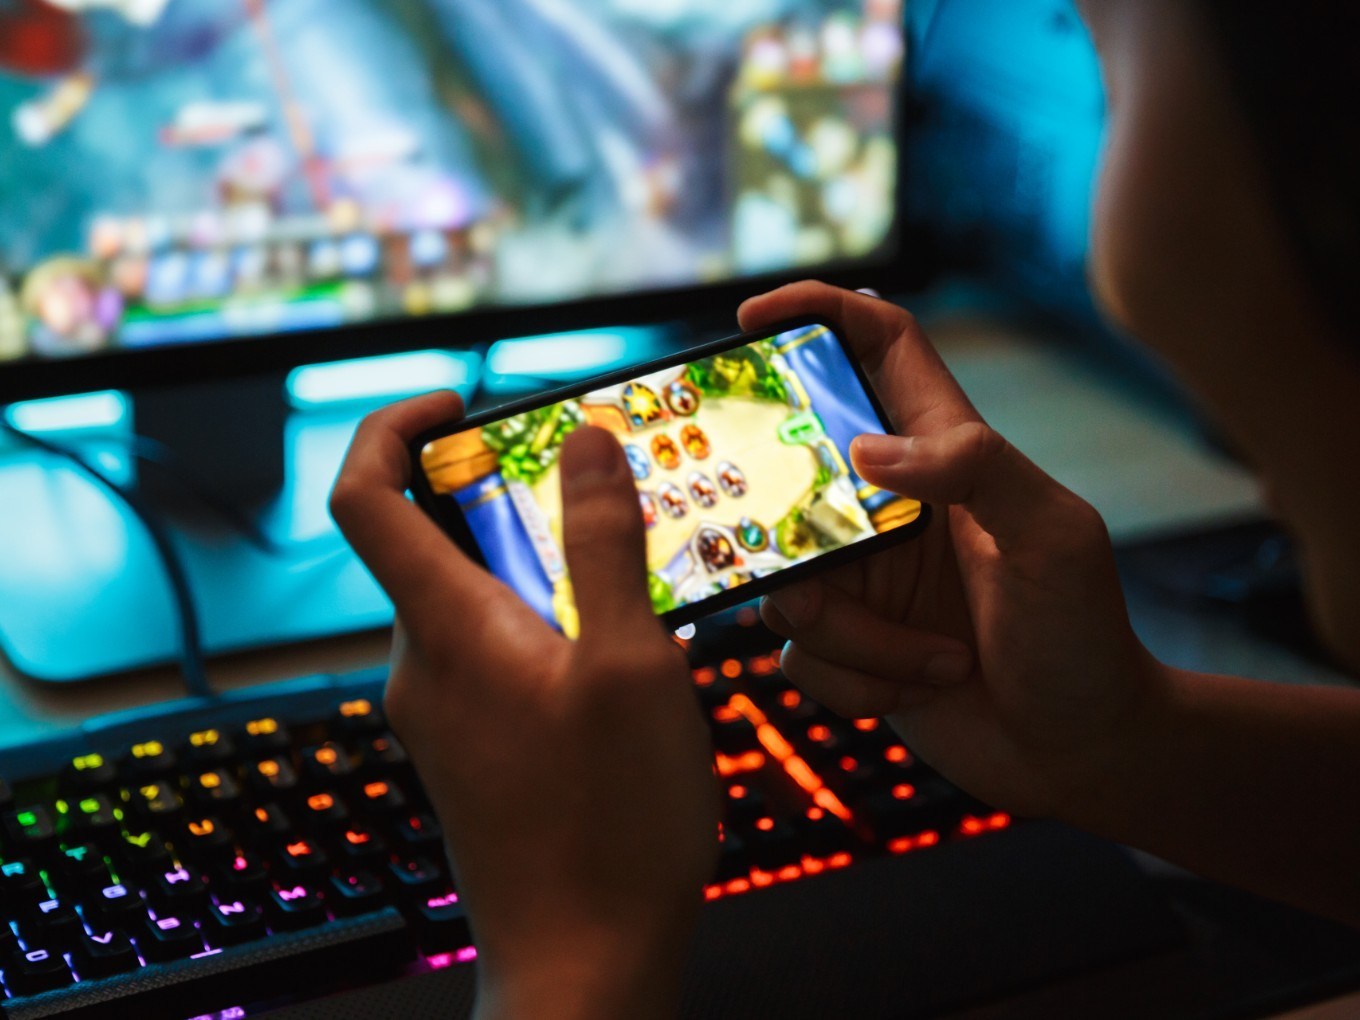 The positive benefits of playing games